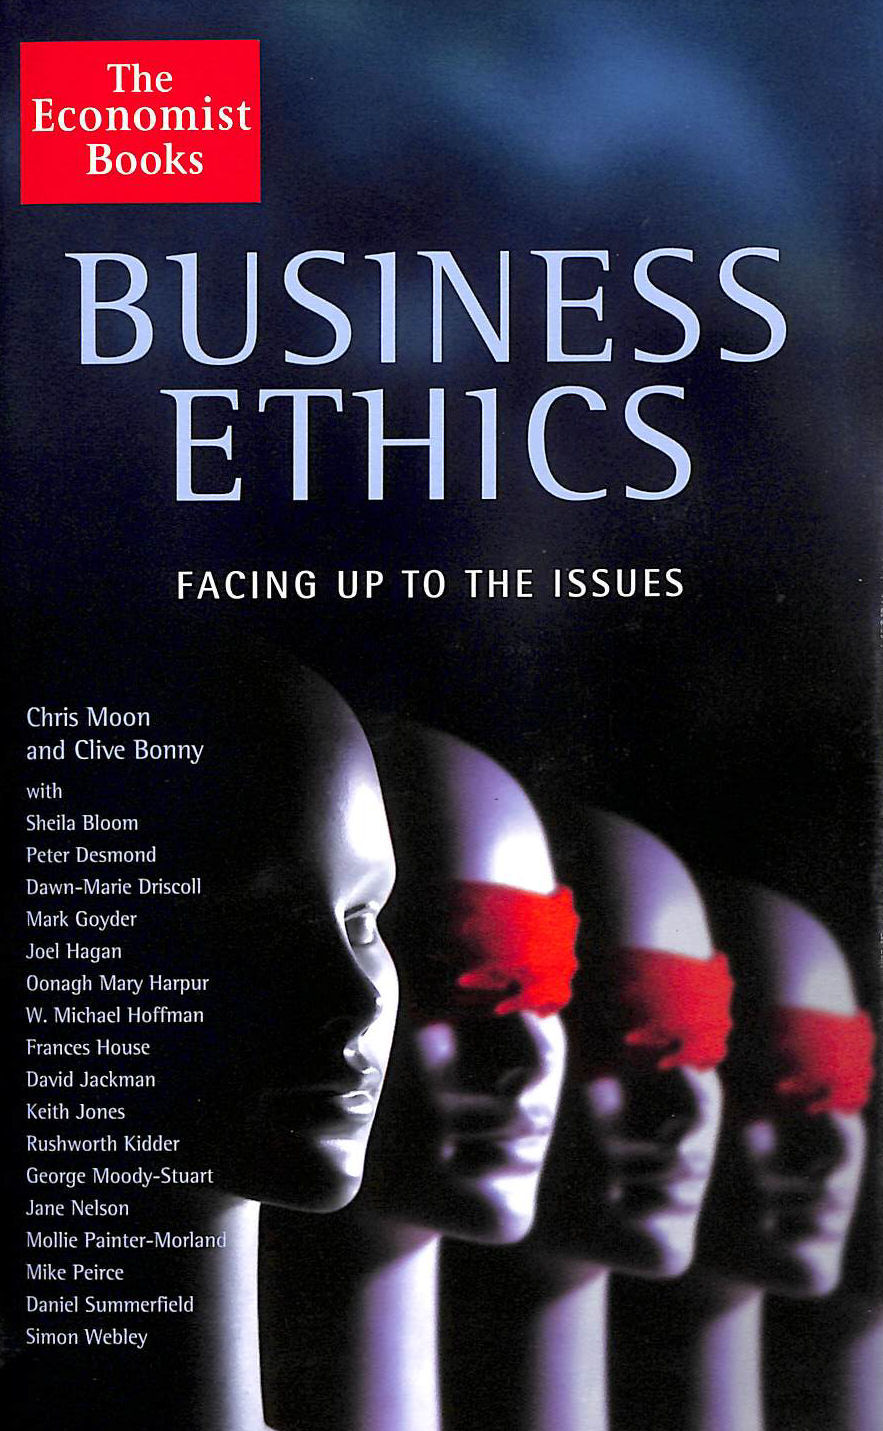 MOON, CHRIS; BONNY, CLIVE - Business Ethics: Facing Up to the Issues: The Issues and How to Manage Them (Economist)